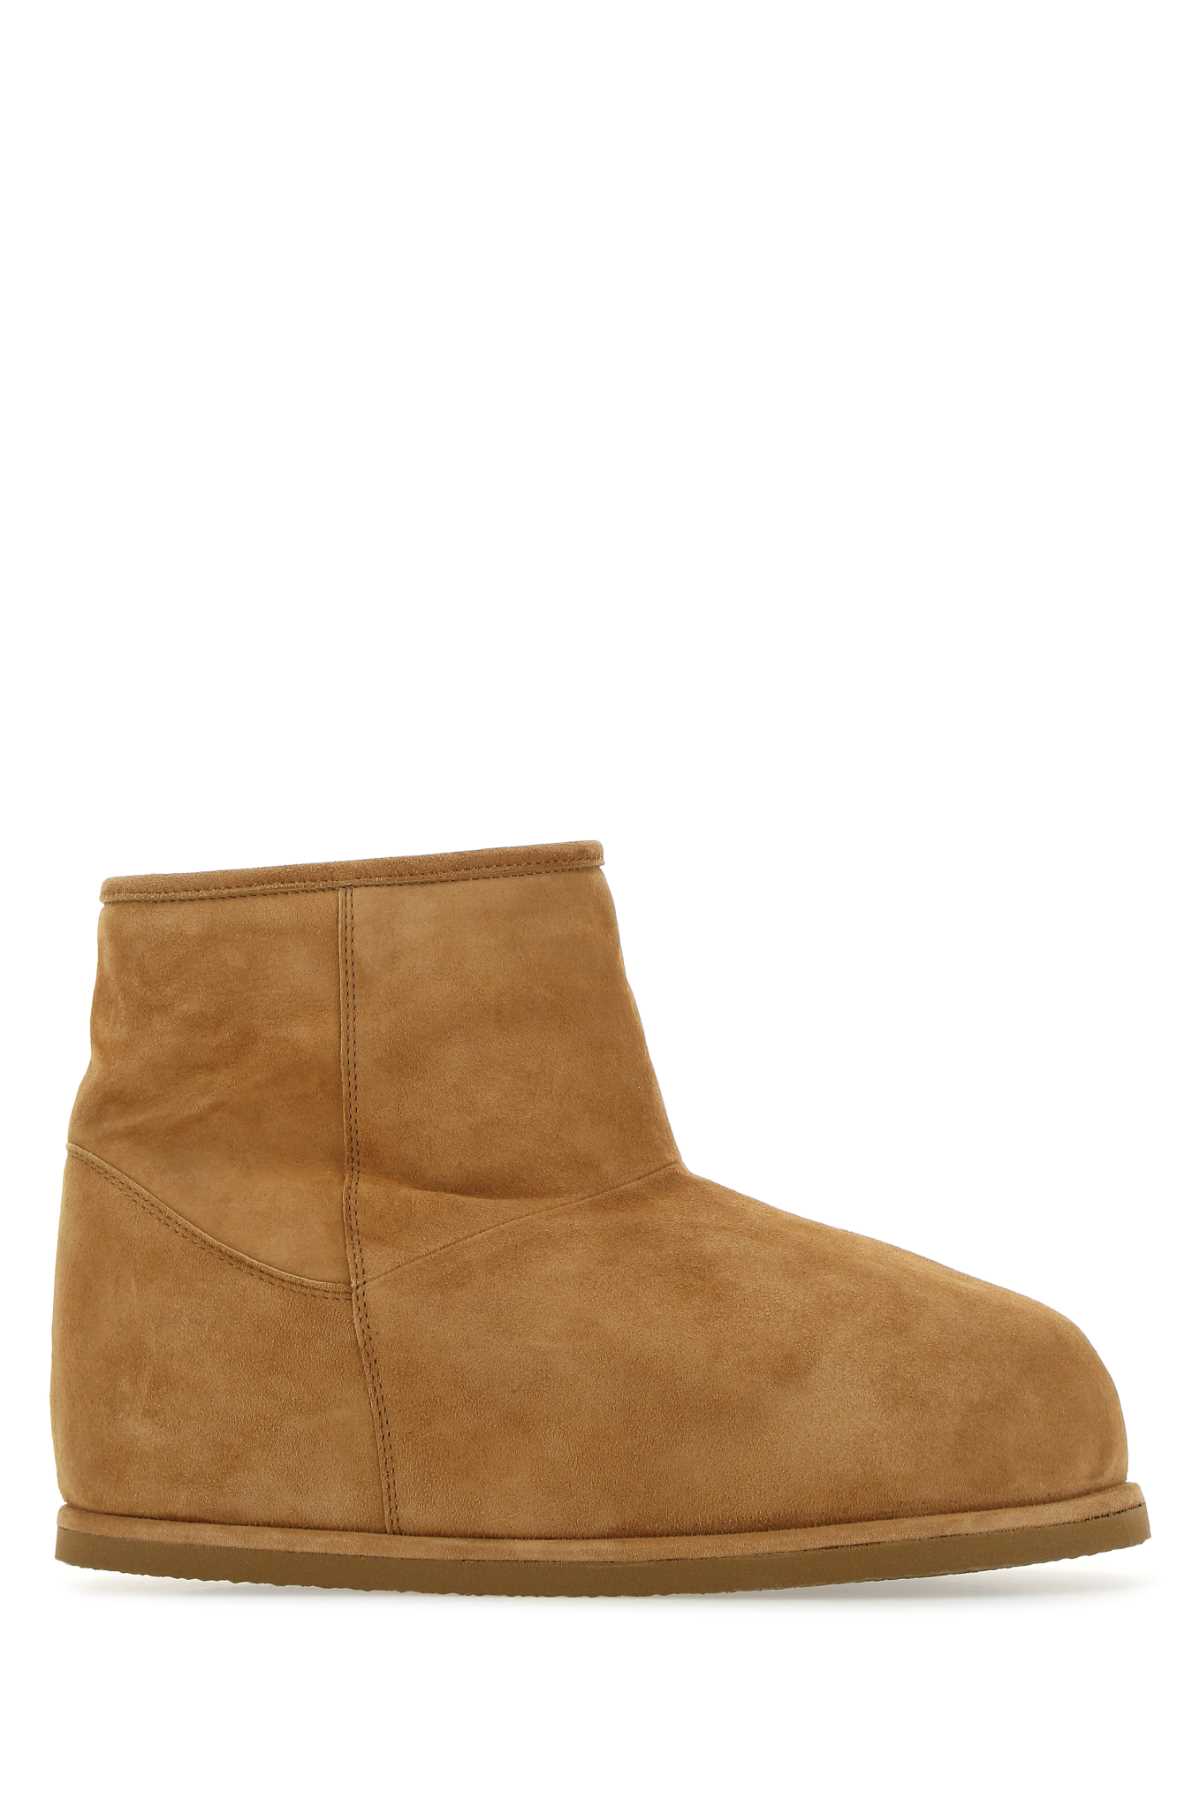 Camel Suede Heidi Ankle Boots